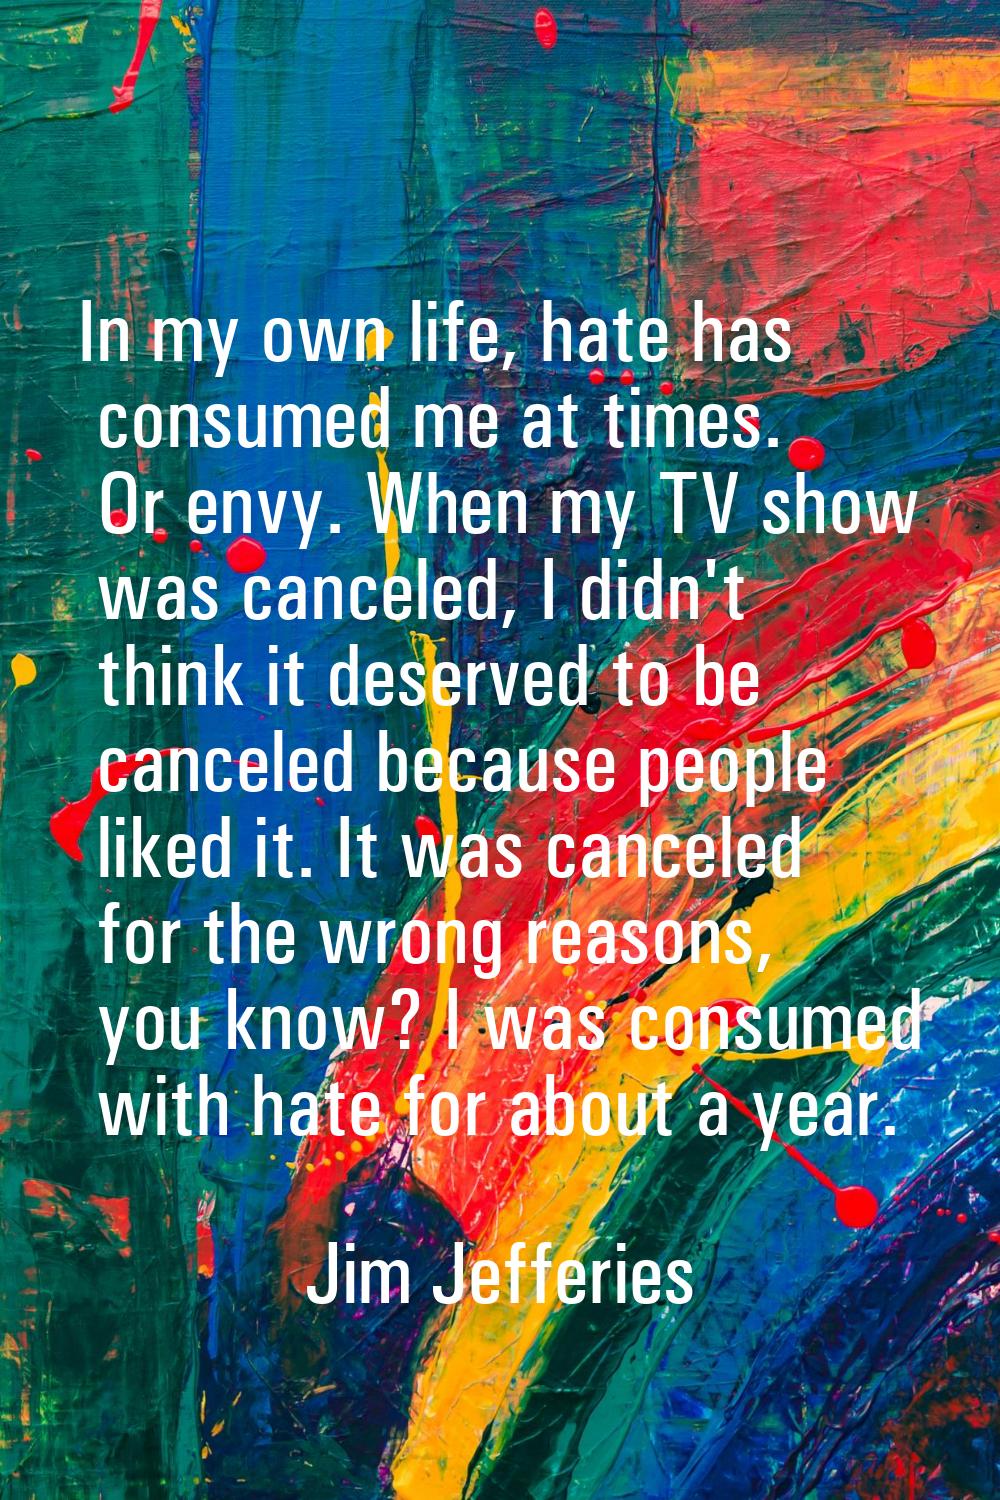 In my own life, hate has consumed me at times. Or envy. When my TV show was canceled, I didn't thin